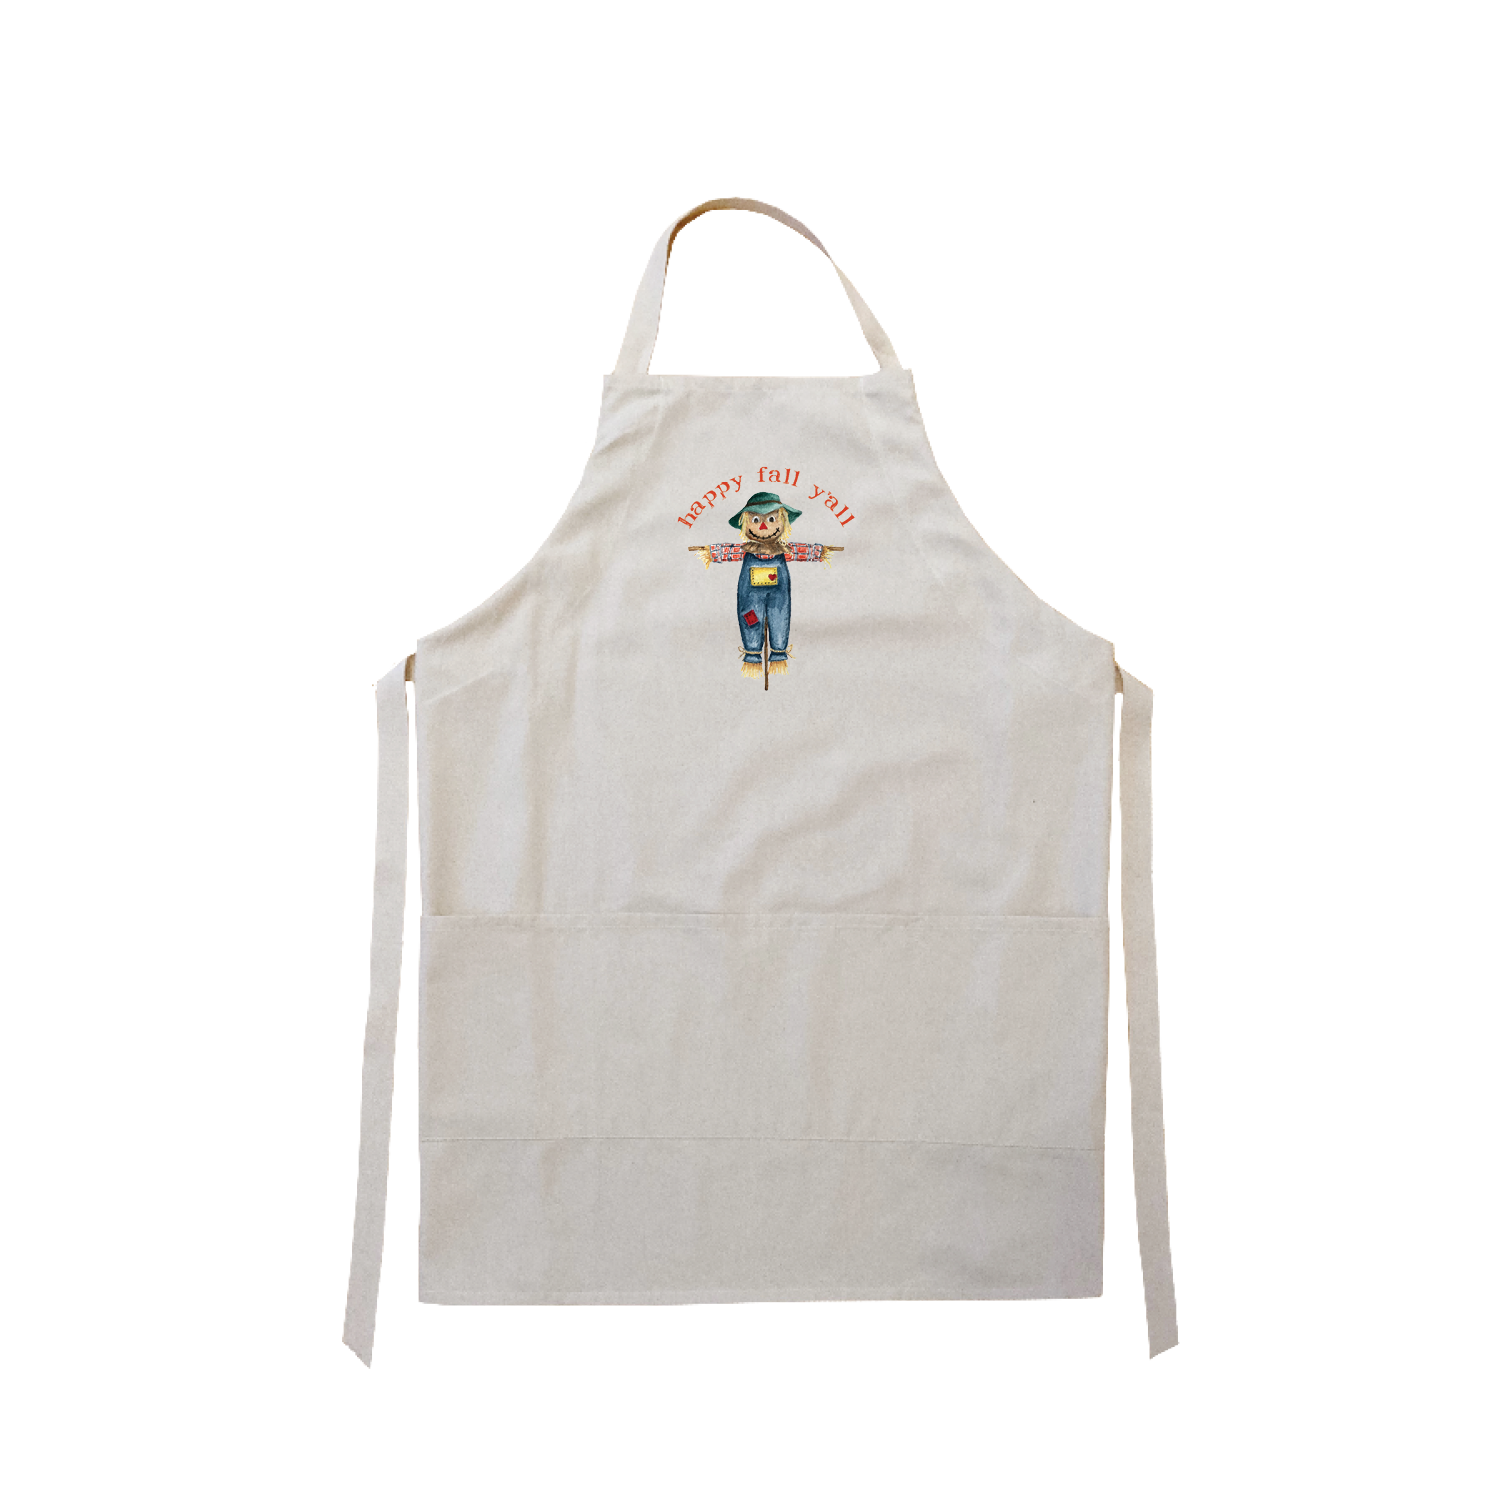 scarecrow happy fall y'all apron